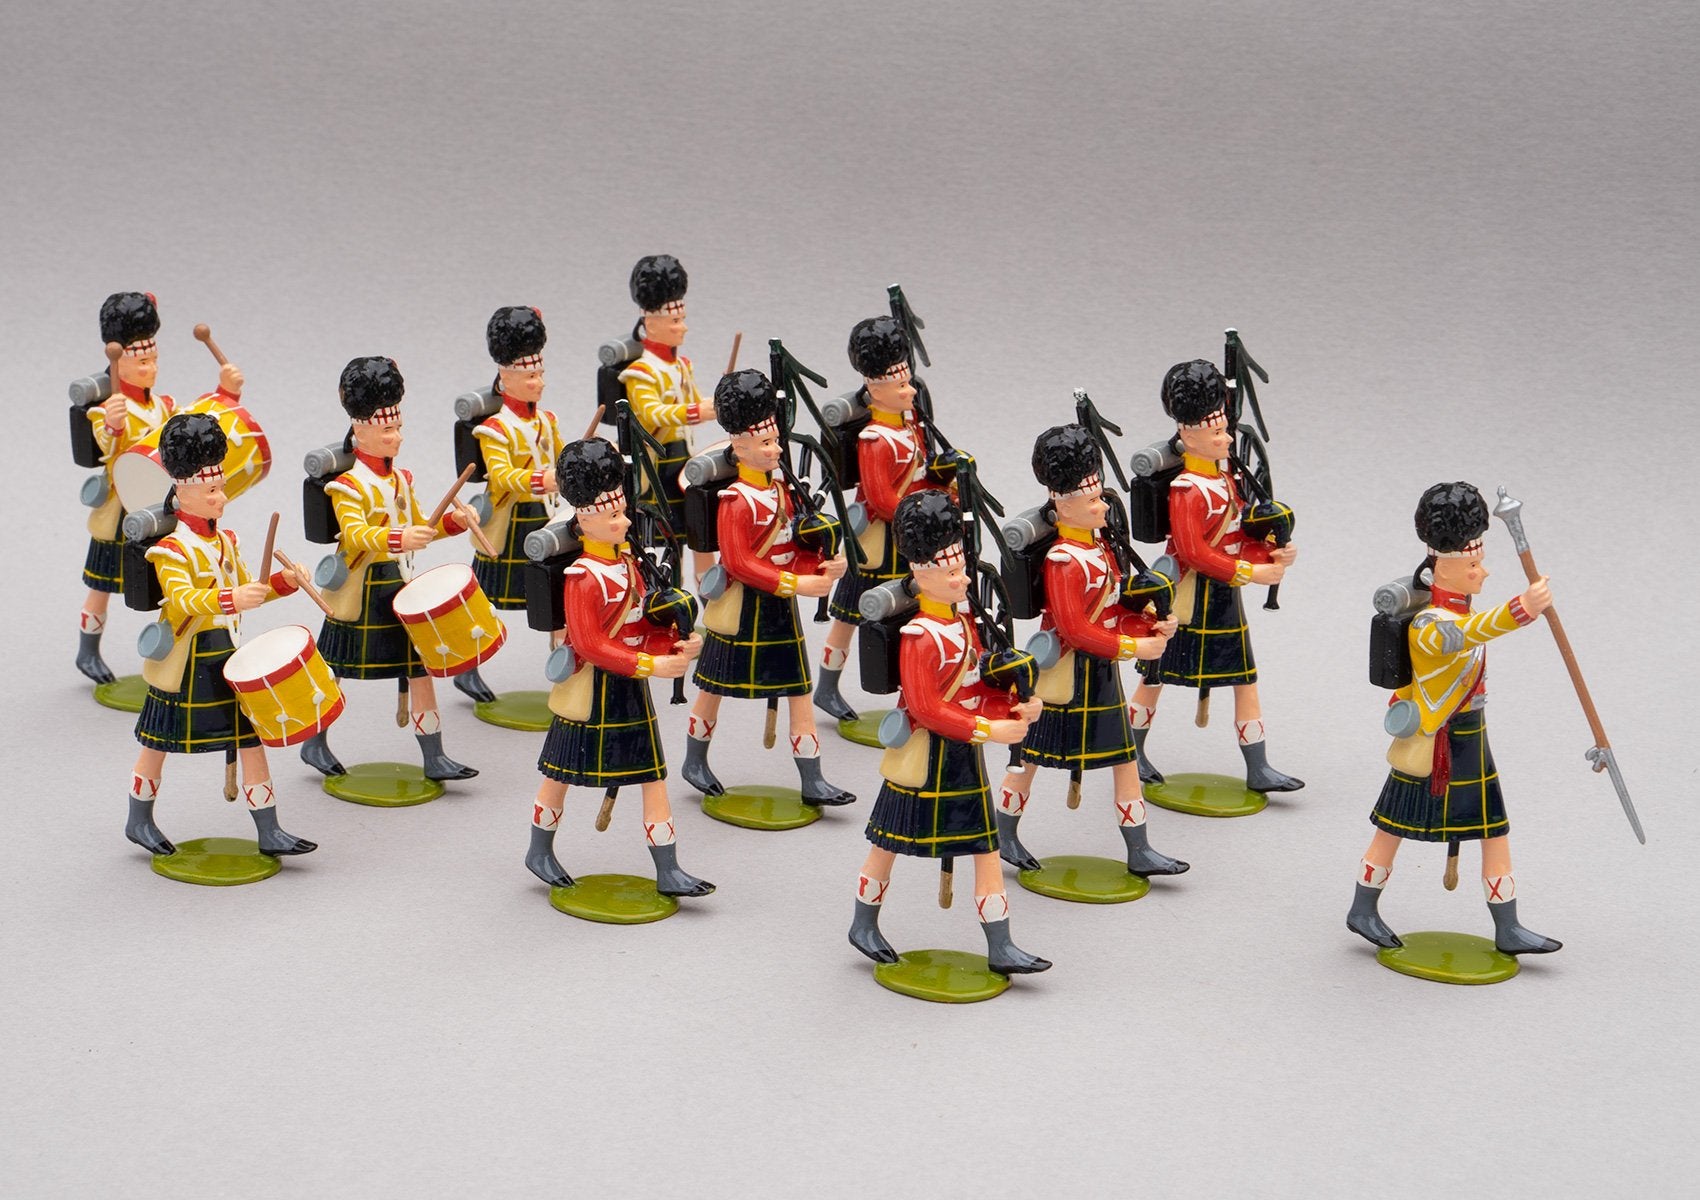 Set 121 Pipe band of the Gordon Highlanders, Waterloo 1815 | British Infantry | Napoleonic Wars | Combined sets 121 and 121a showing the combined Gordon Highlanders Pipe Band 1815 | Waterloo | © Imperial Productions | Sculpt by David Cowe